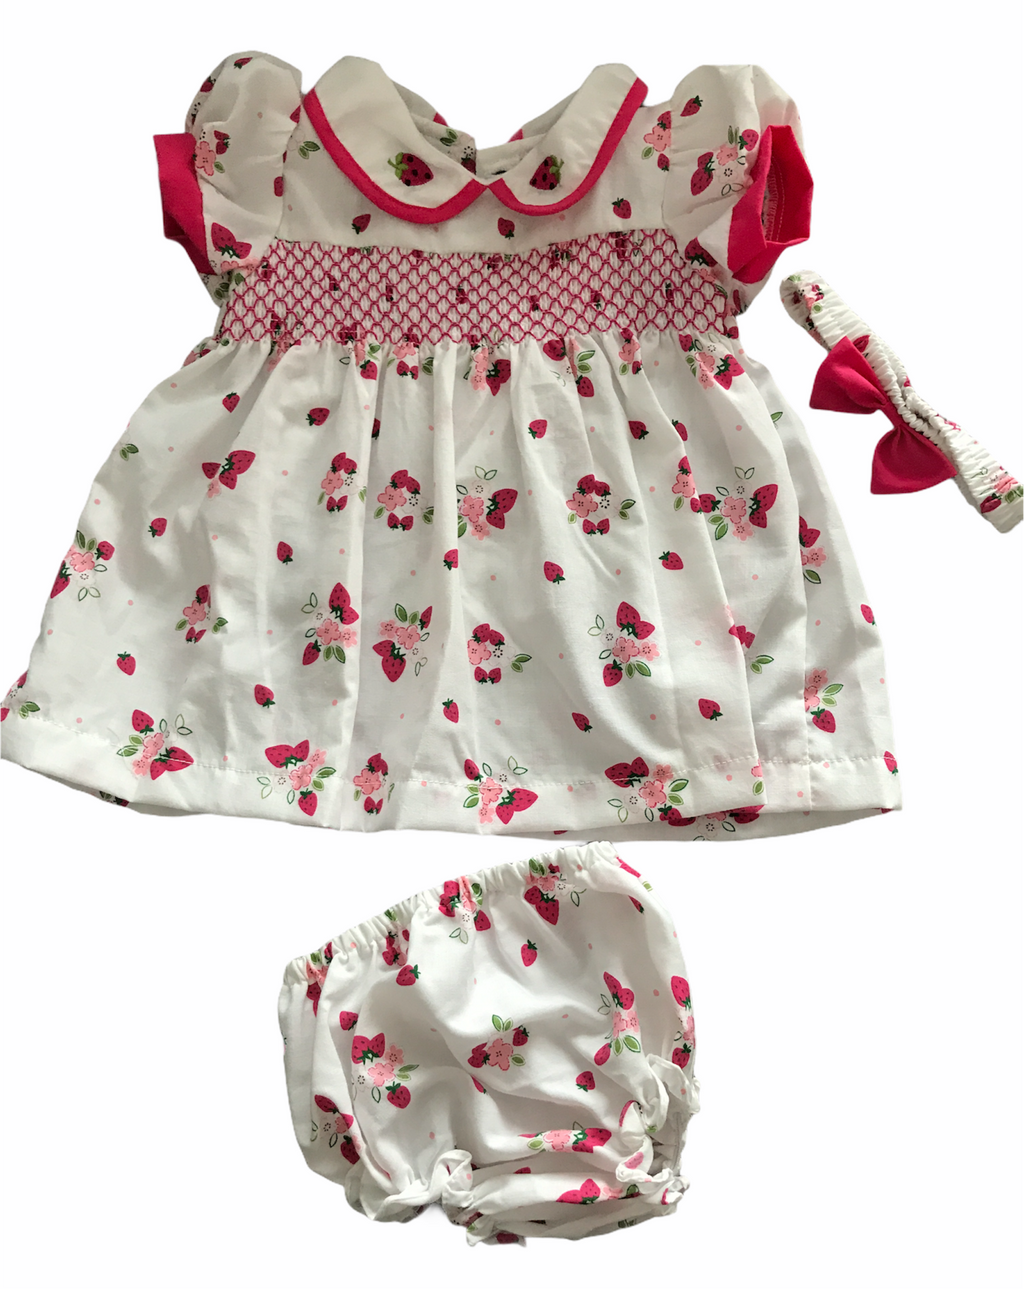 Pink berries and flower dress set